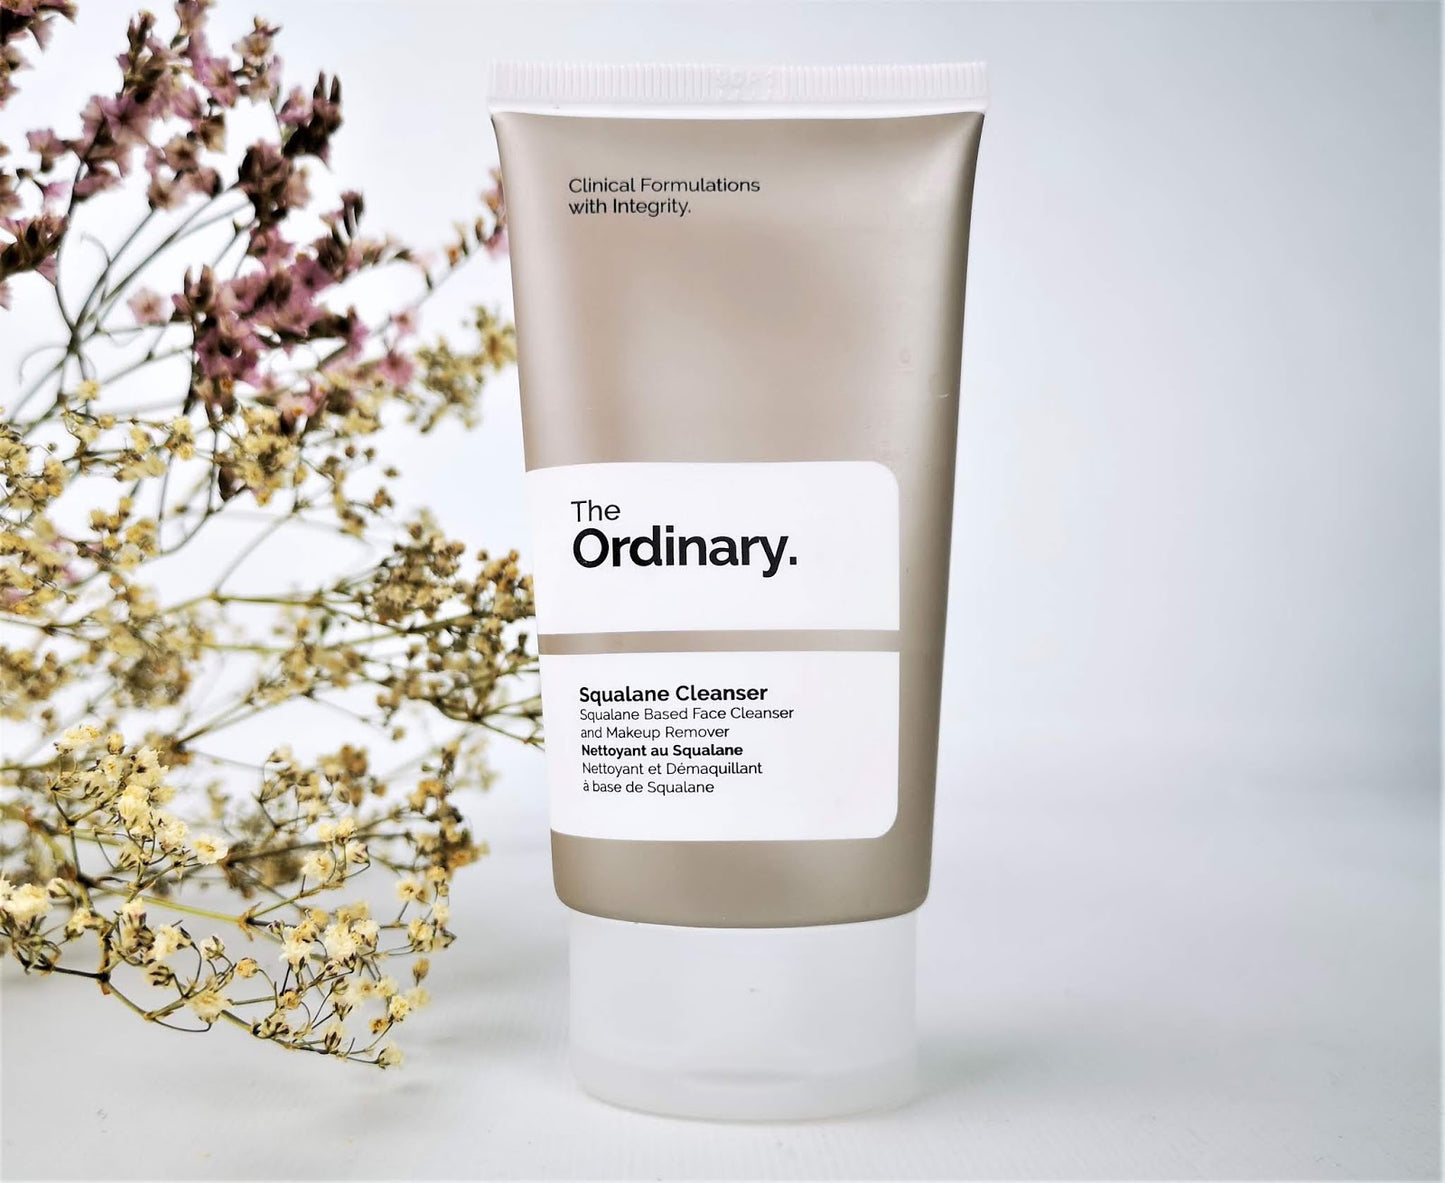 Squalane cleanser The Ordinary